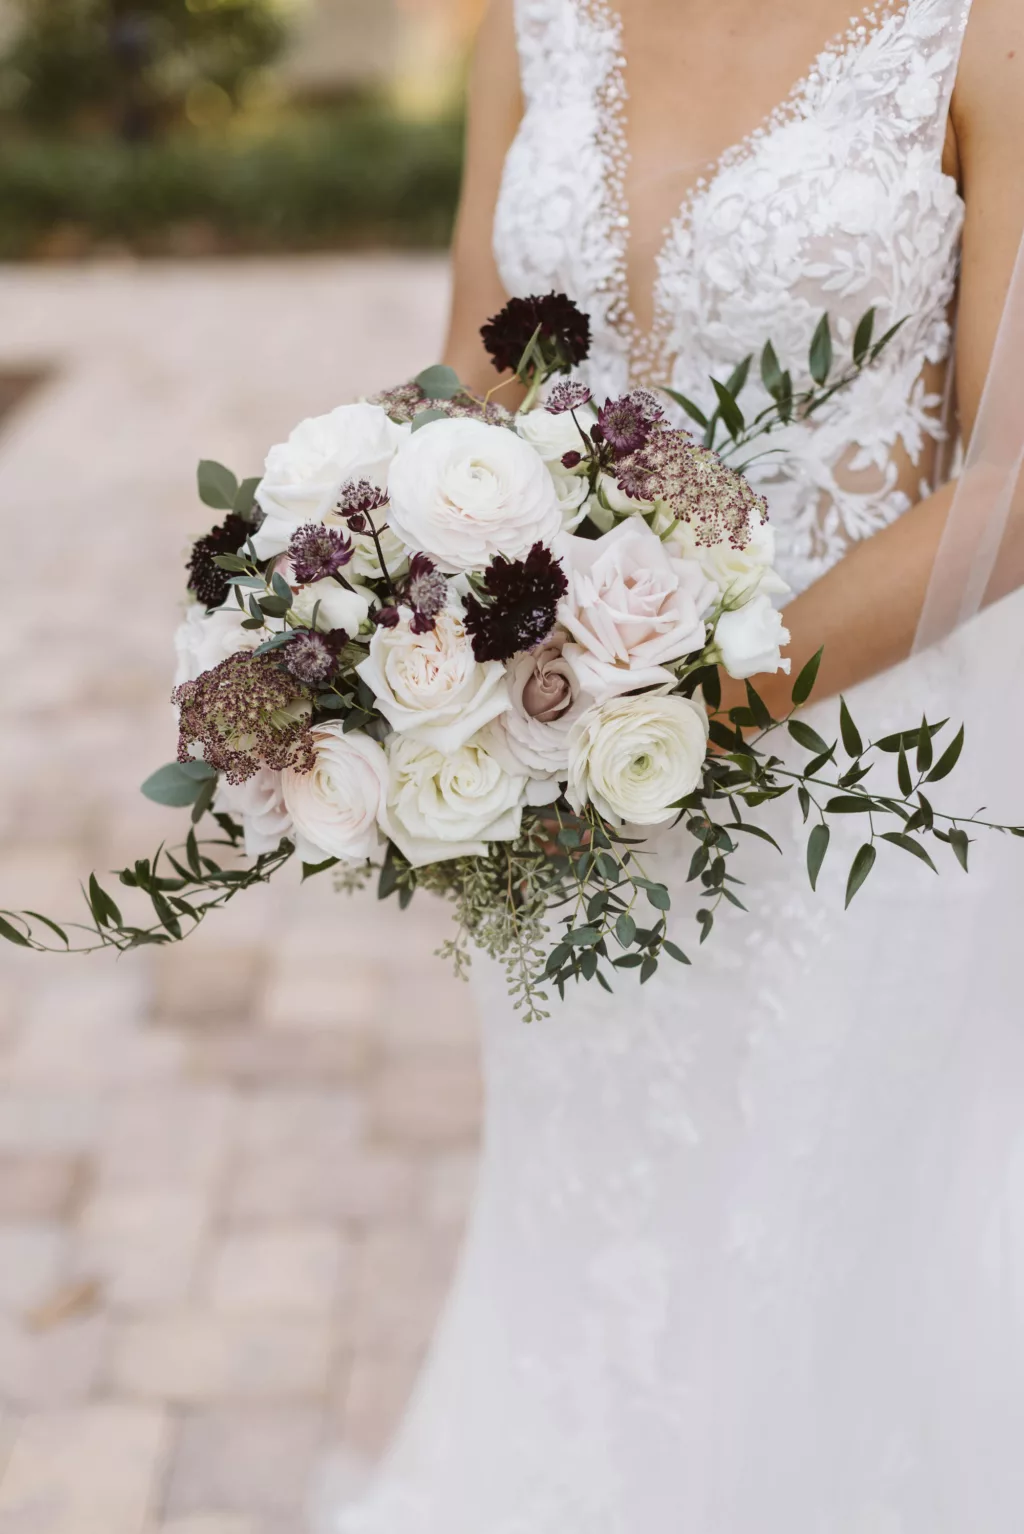 Fall Inspired Mauve, Purple, White Roses, and Greenery Bridal Wedding Bouquet Ideas | Tampa Bay Florist Bruce Wayne Florals